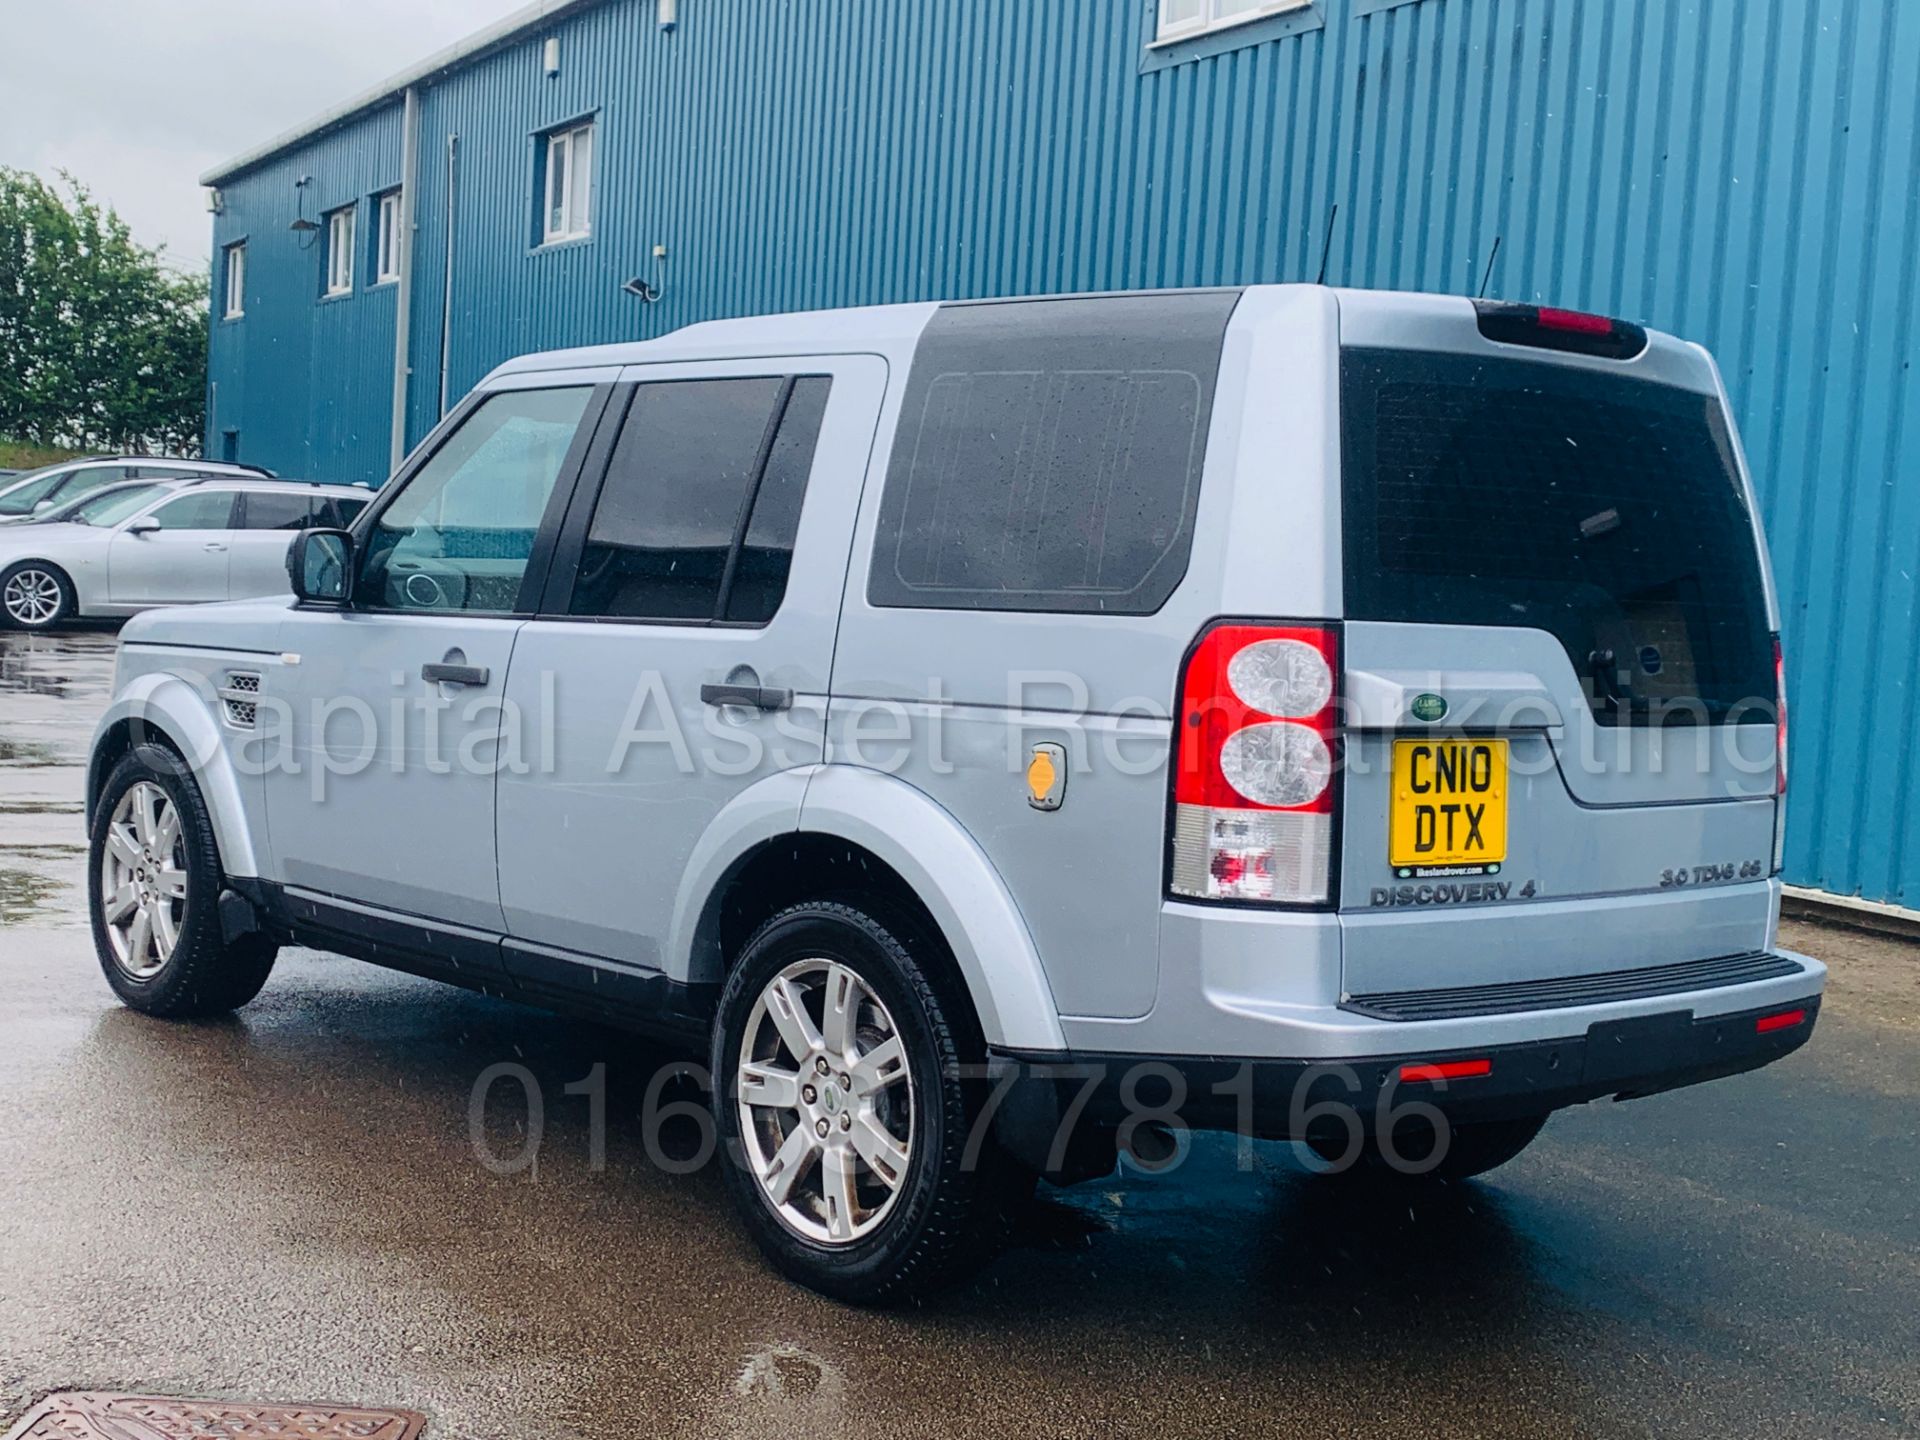 (On Sale) LAND ROVER DISCOVERY 4 *GS EDITION* SUV (2010) '3.0 TDV6 - 190 BHP - AUTO' **HUGE SPEC** - Image 8 of 45